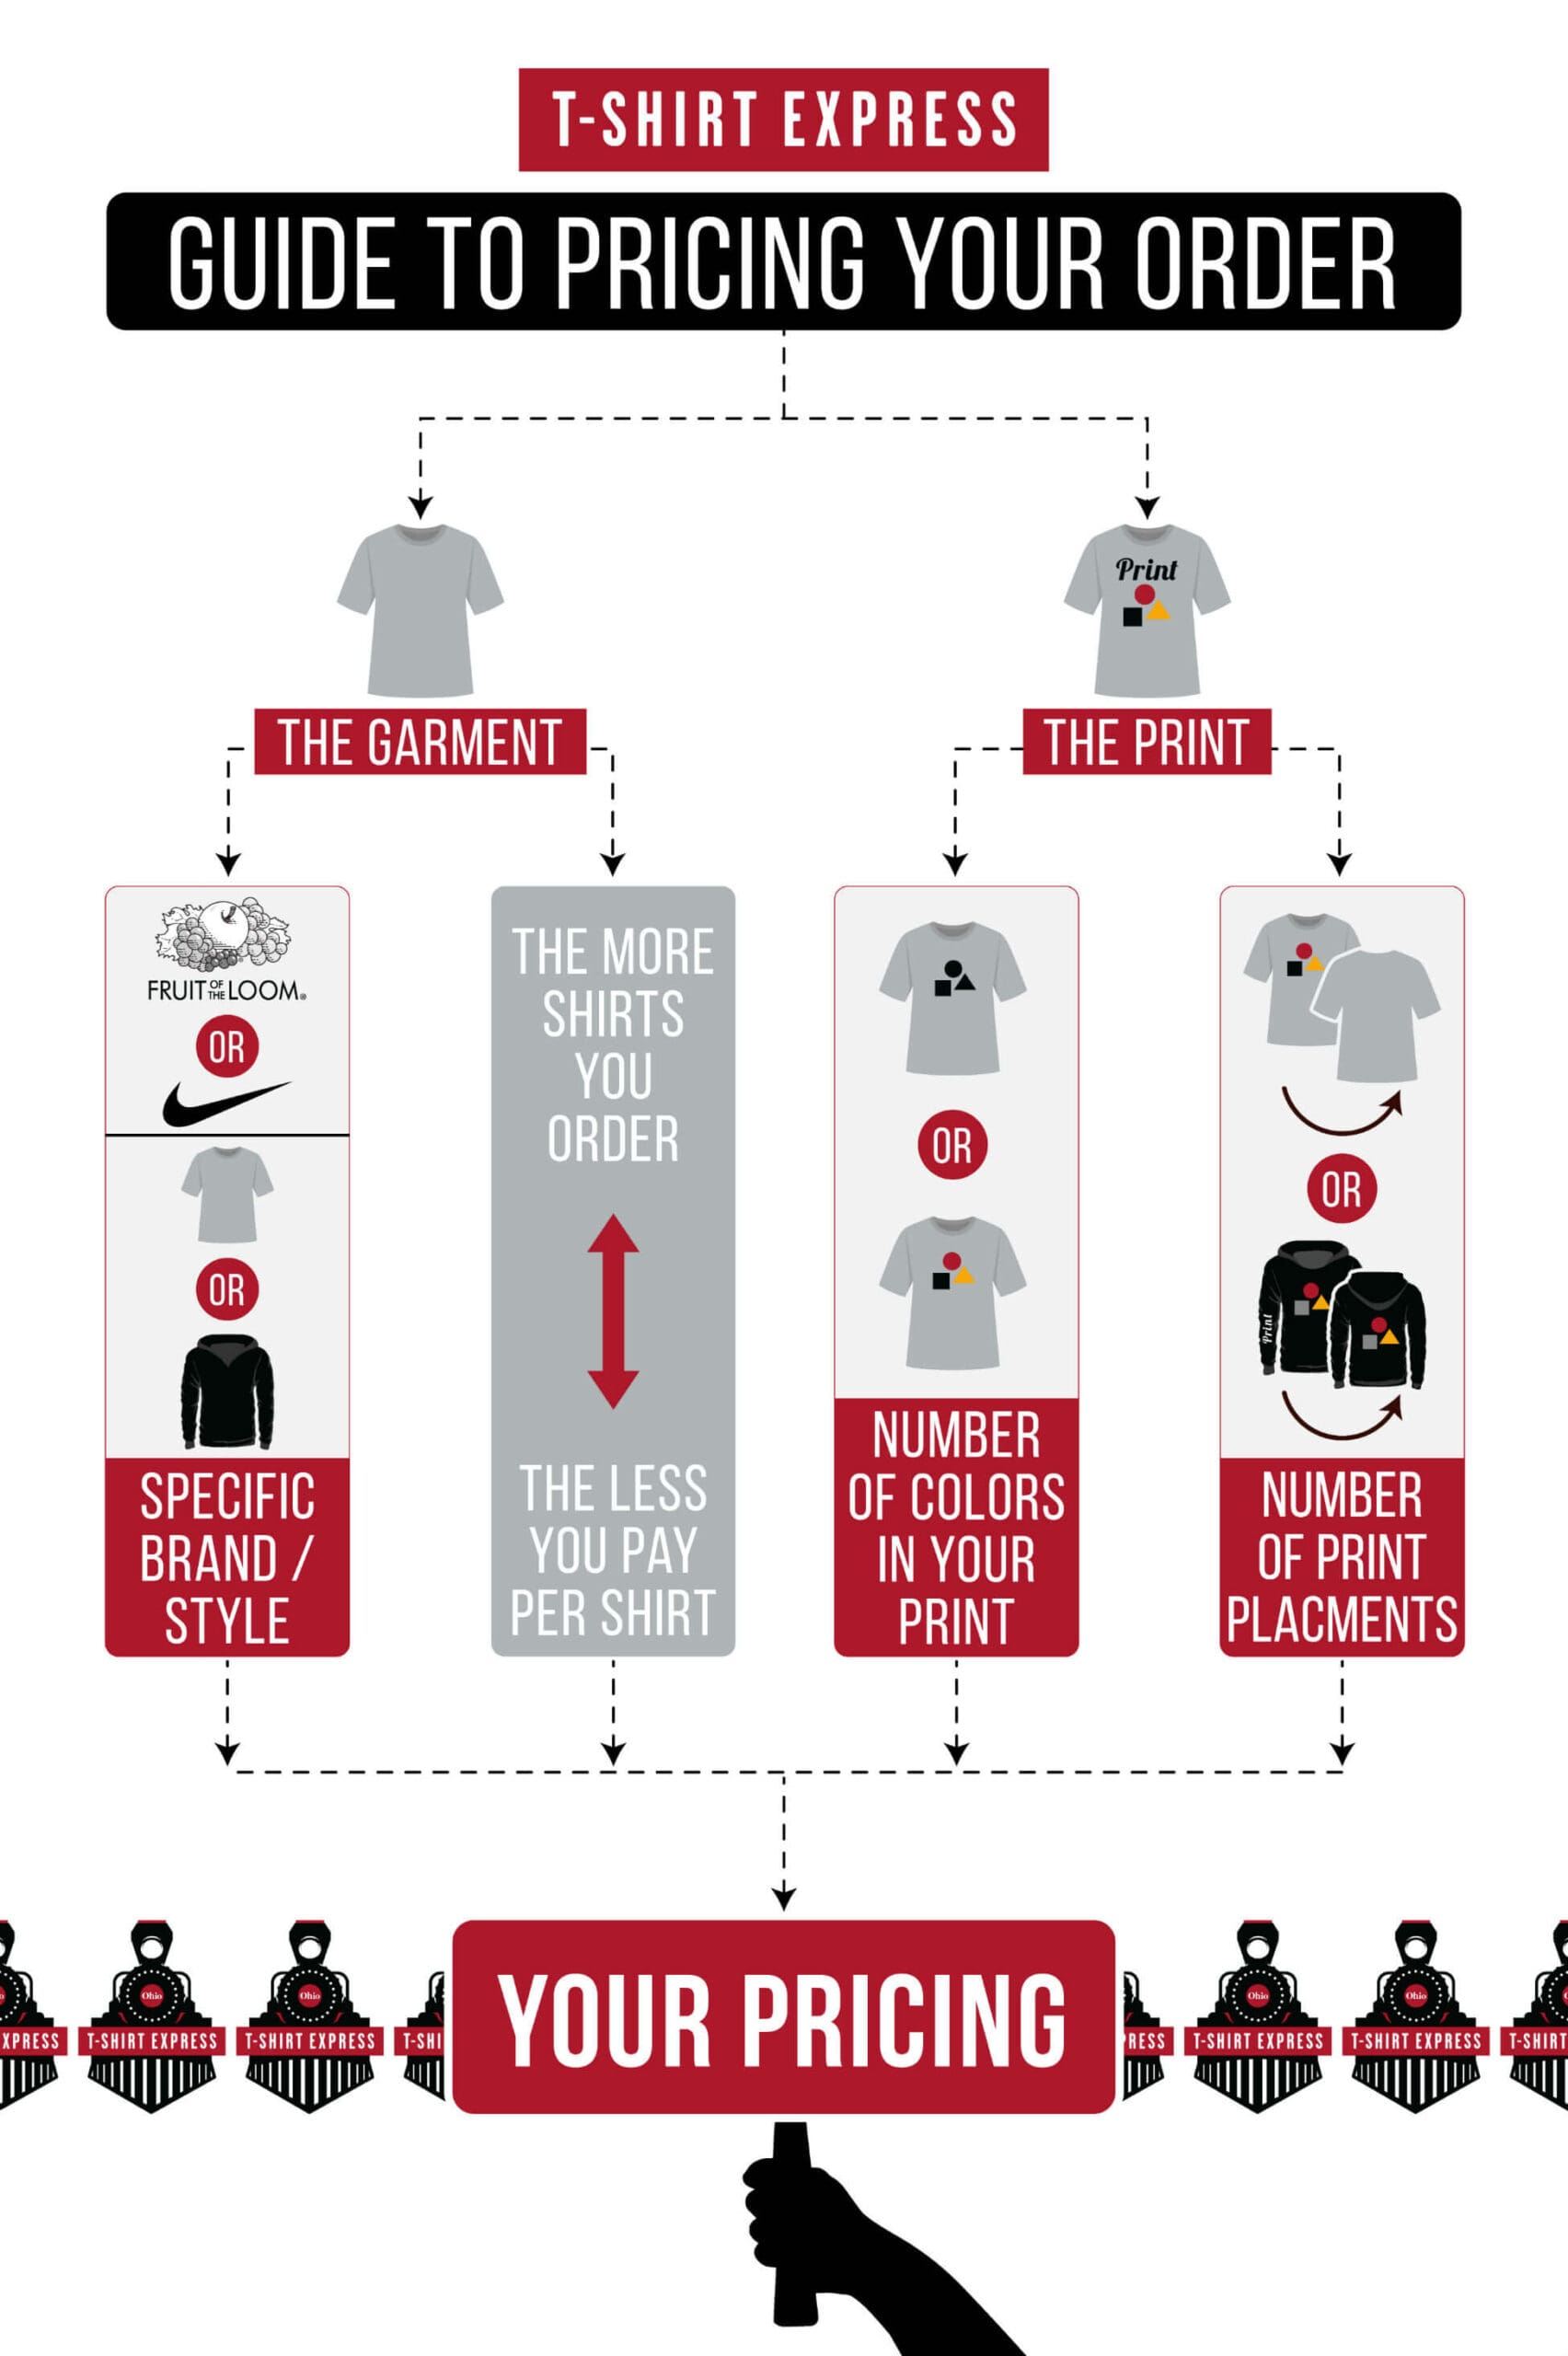 t-shirt express guide to pricing for Roberts